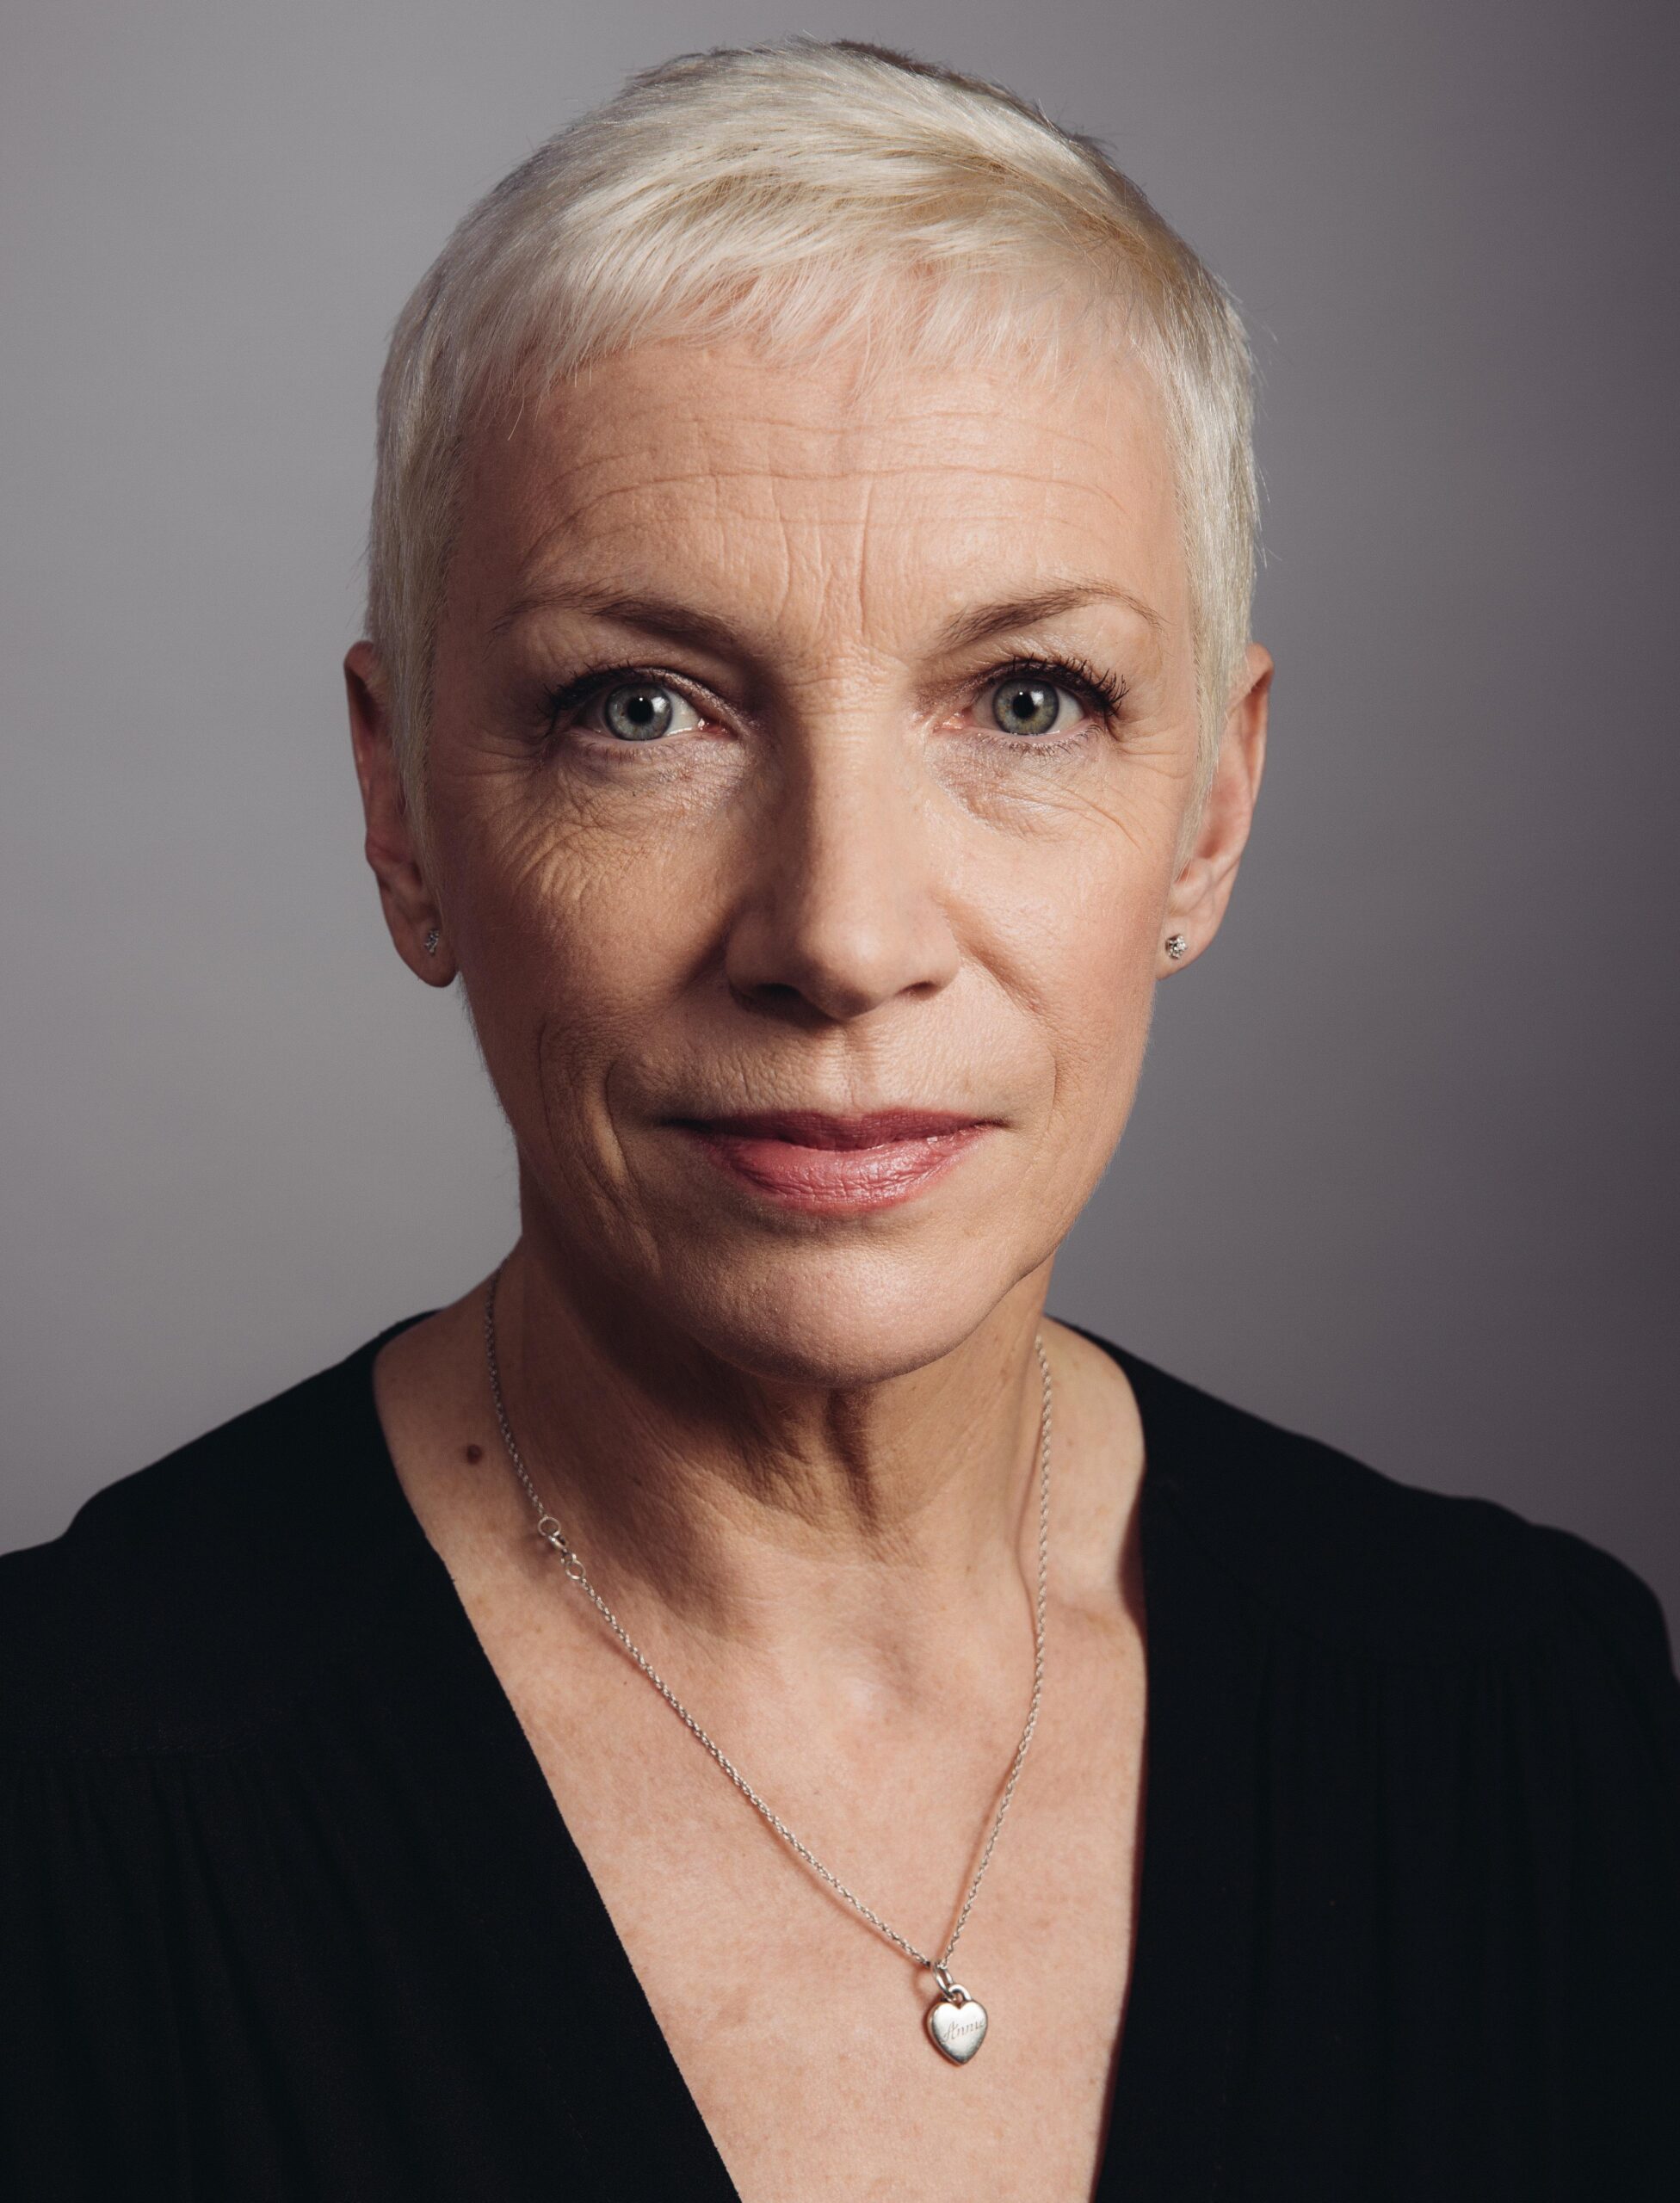 Girls Annie Lennox – 100% Quality HD Wallpapers in High Quality